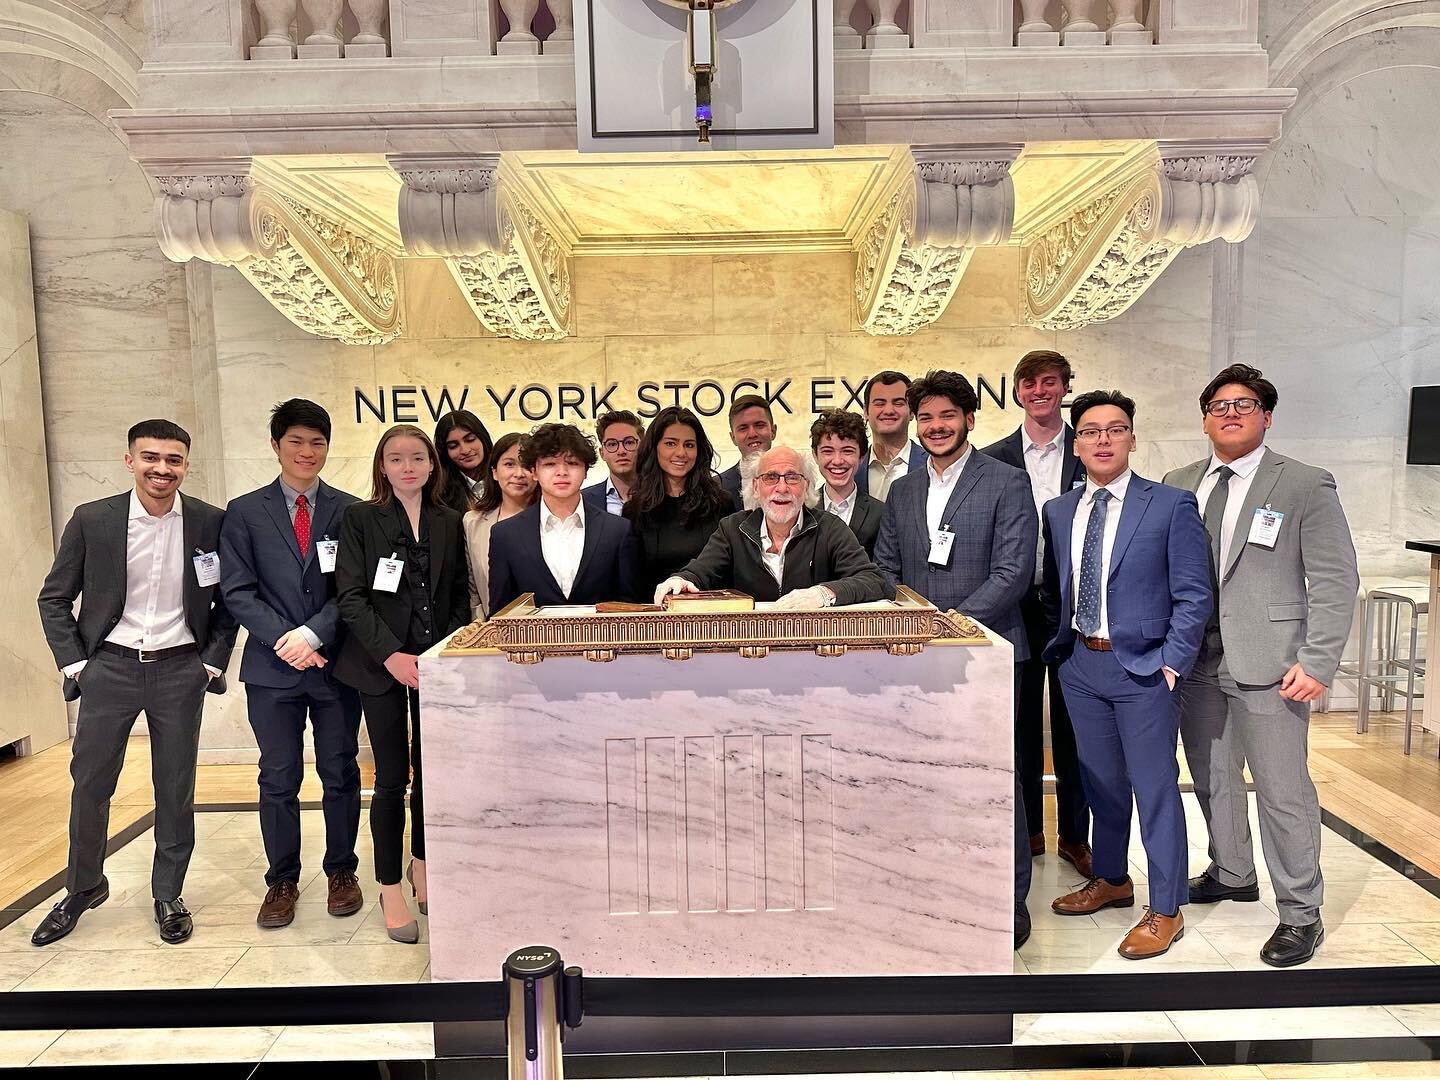 On International Women&rsquo;s Day, we had the honor of visiting the New York Stock Exchange once again where we watched KKR ring the morning bell and another wonderful tour by Peter Tuchman ( @einsteinofwallst ). 

Thank you again to Peter for the a